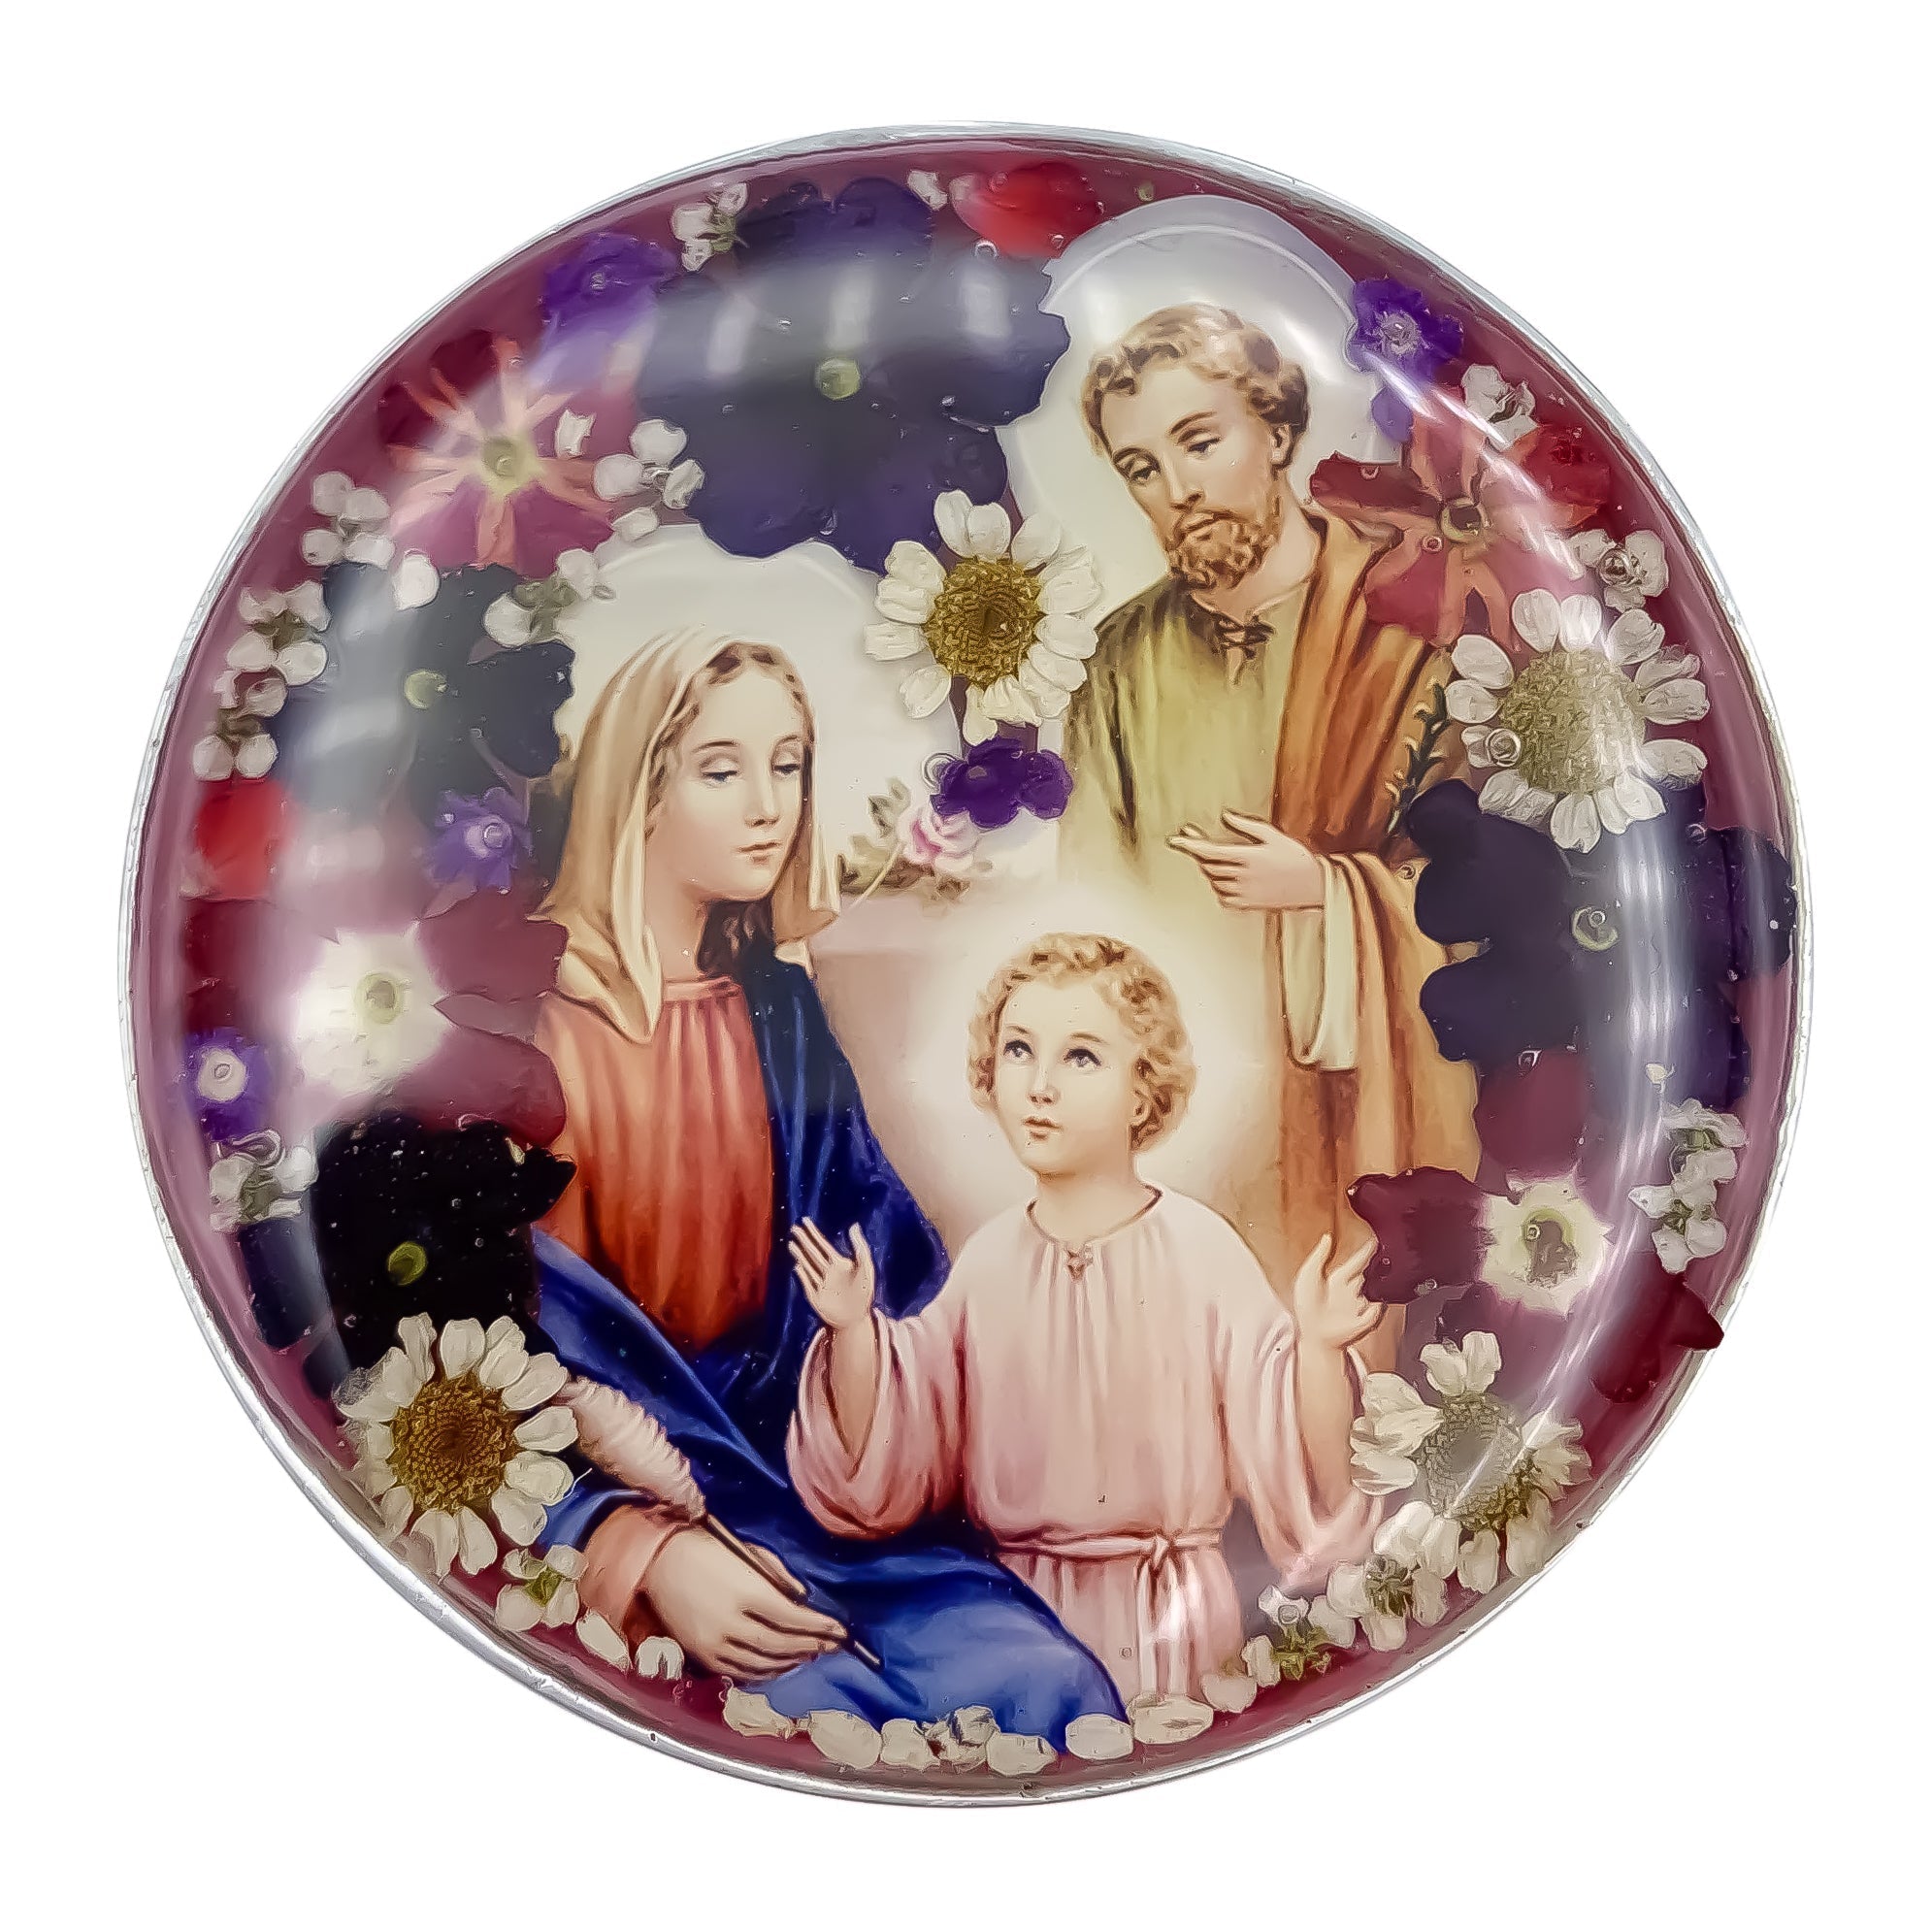 Discover Divine Devotion with Our Holy Family Collection